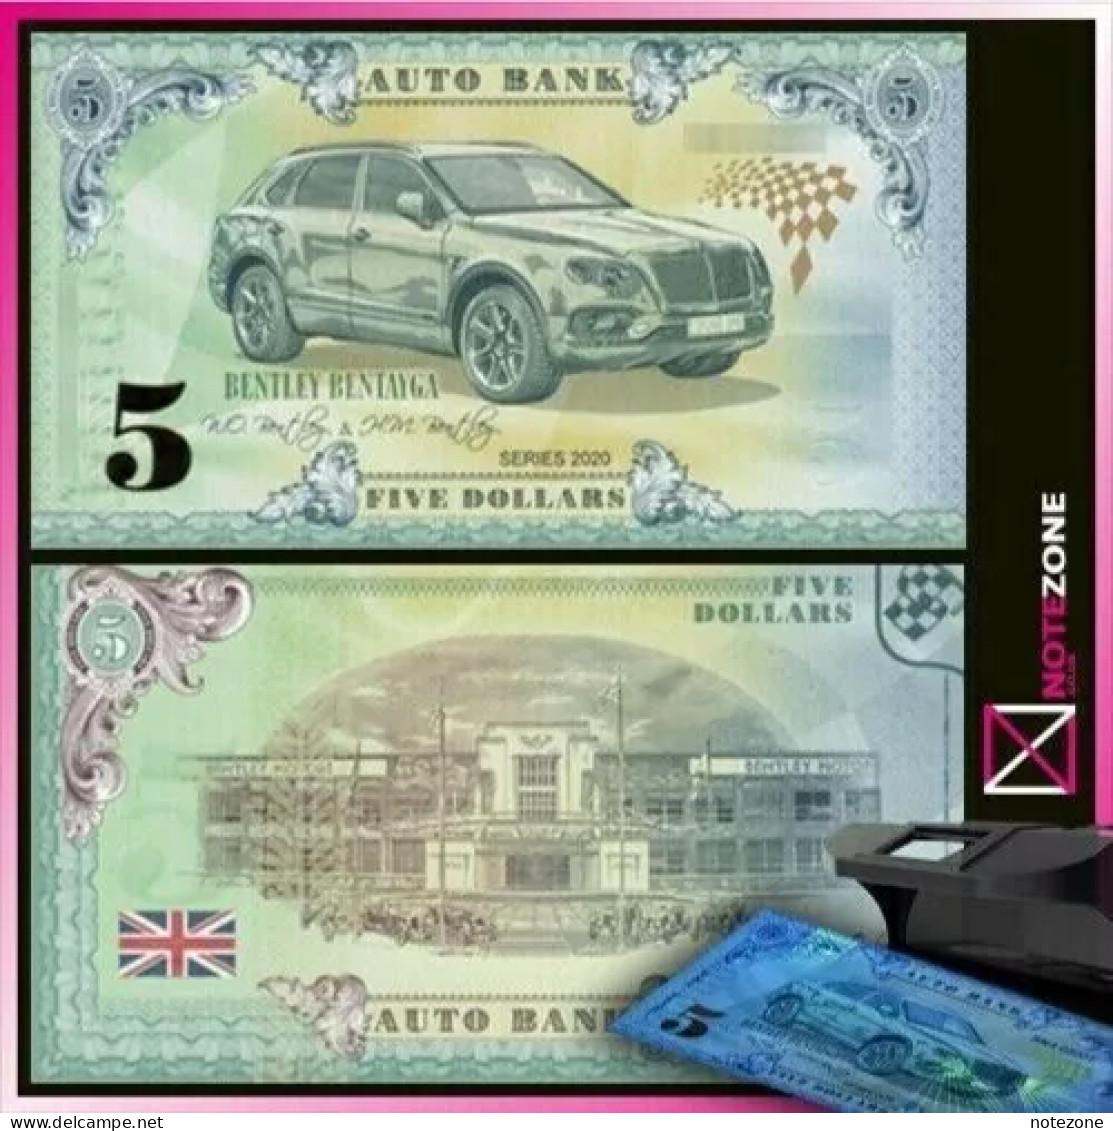 6 NOTES SET!!! Auto Bank CARS SET $5 fantasy test note private